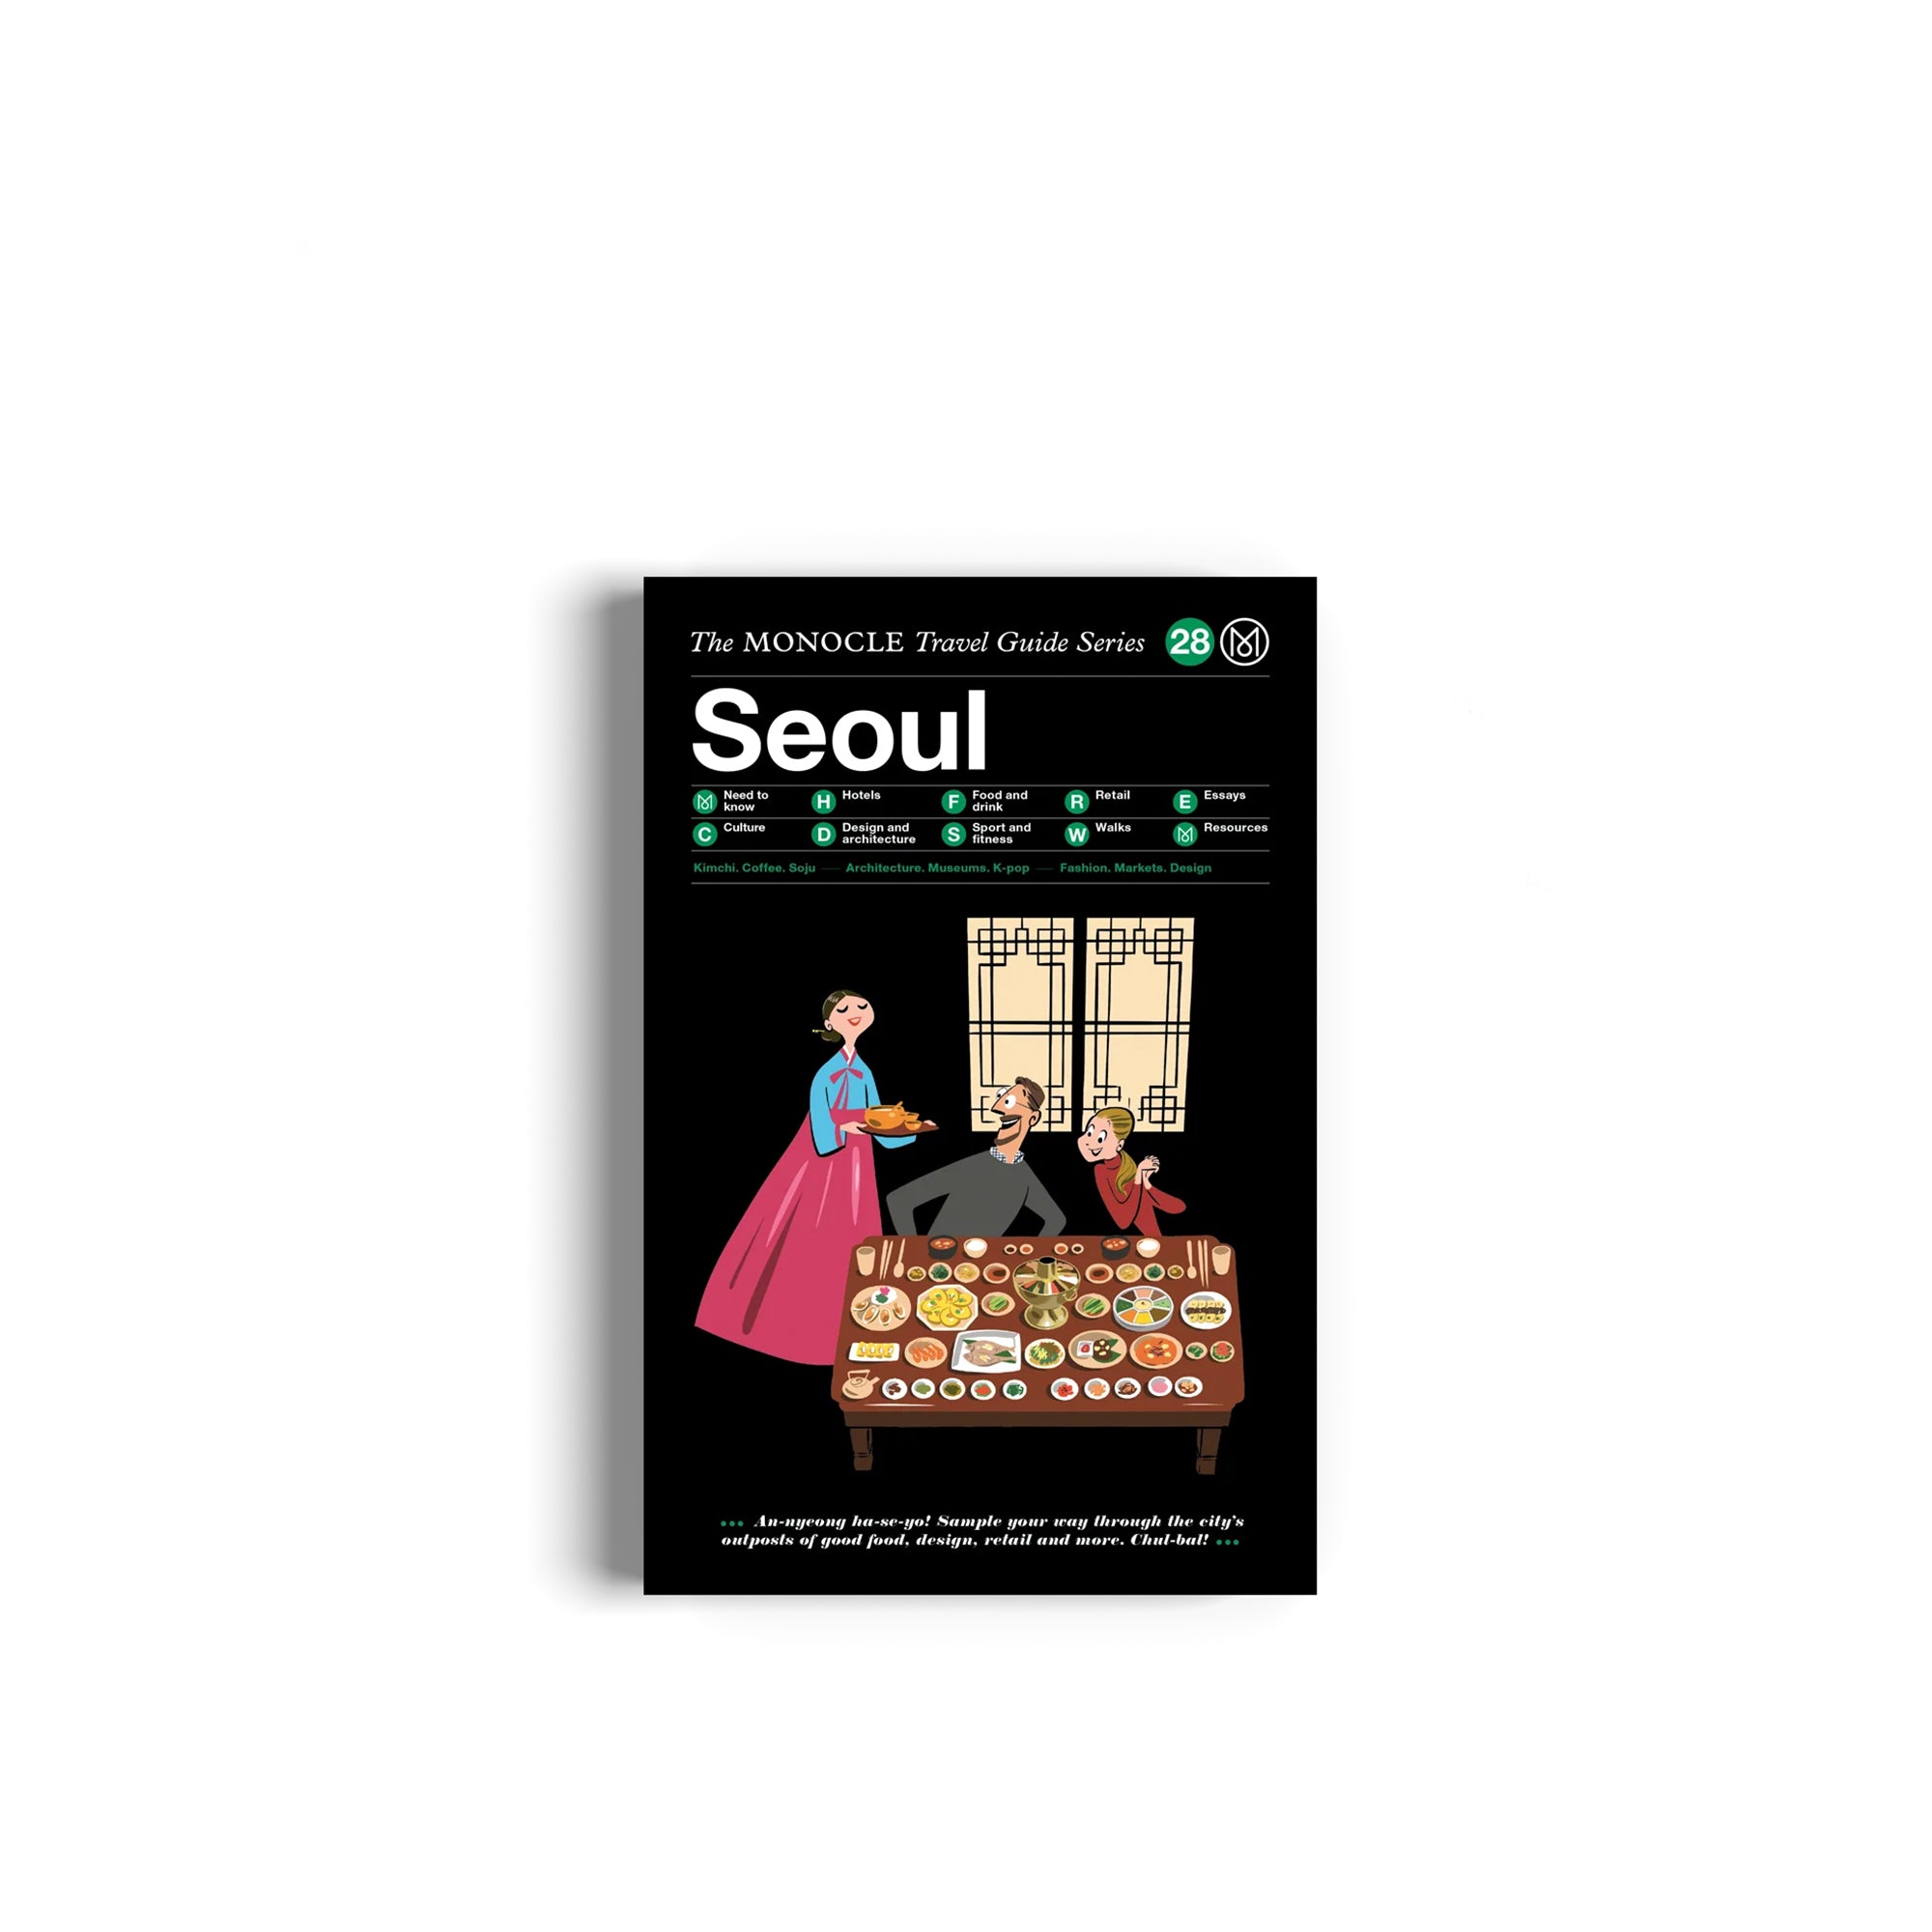 The Monocle Travel Guide Series: Seoul